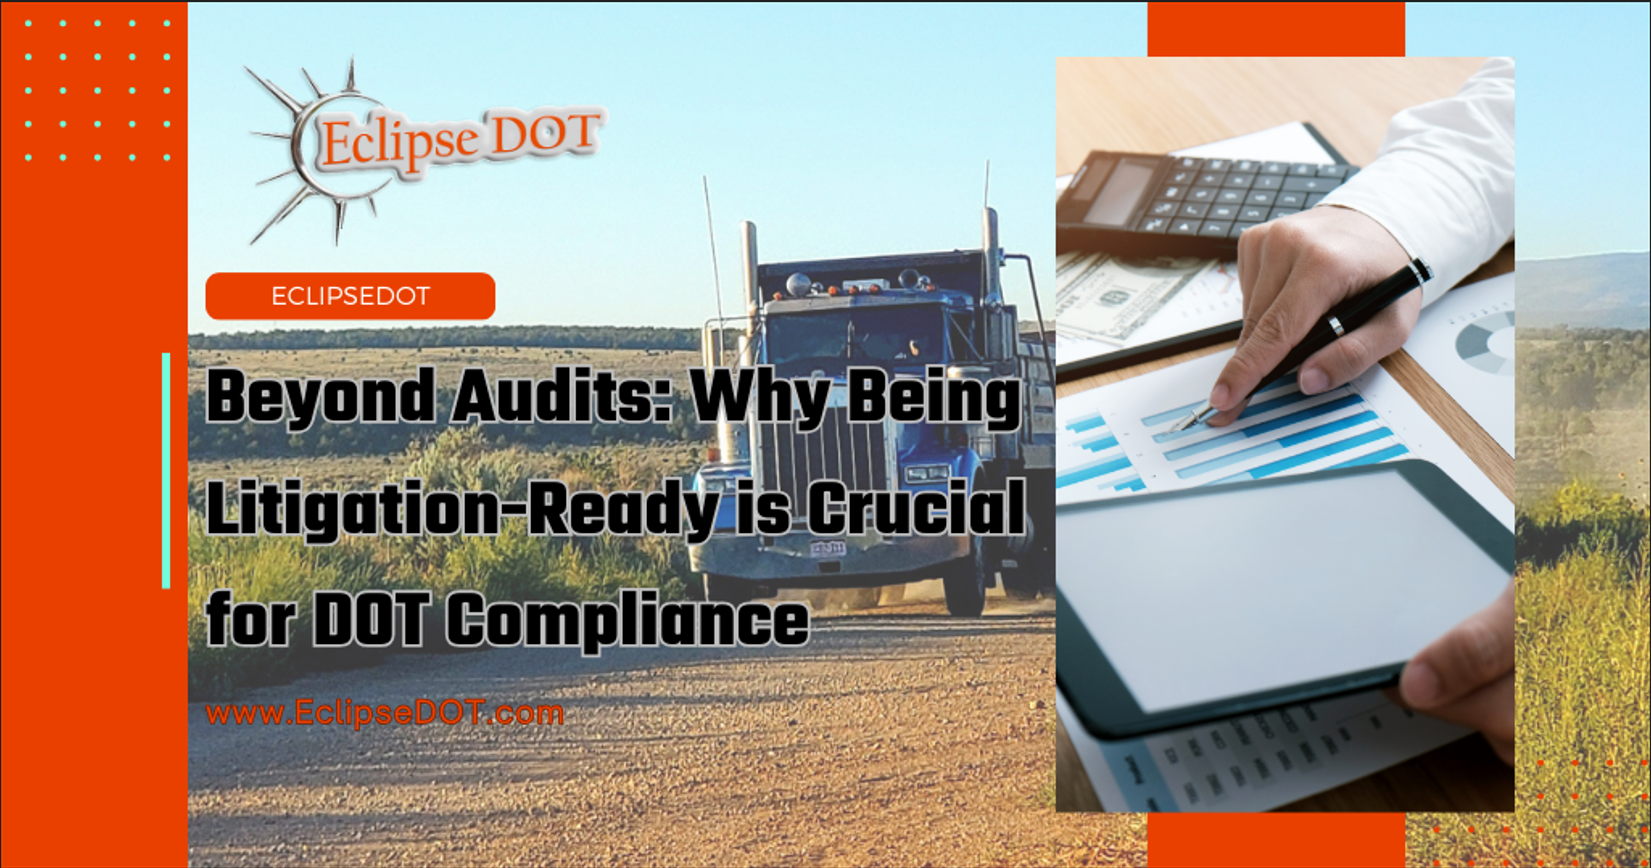 Beyond Audits: Why Being Litigation-Ready is Crucial for DOT Compliance